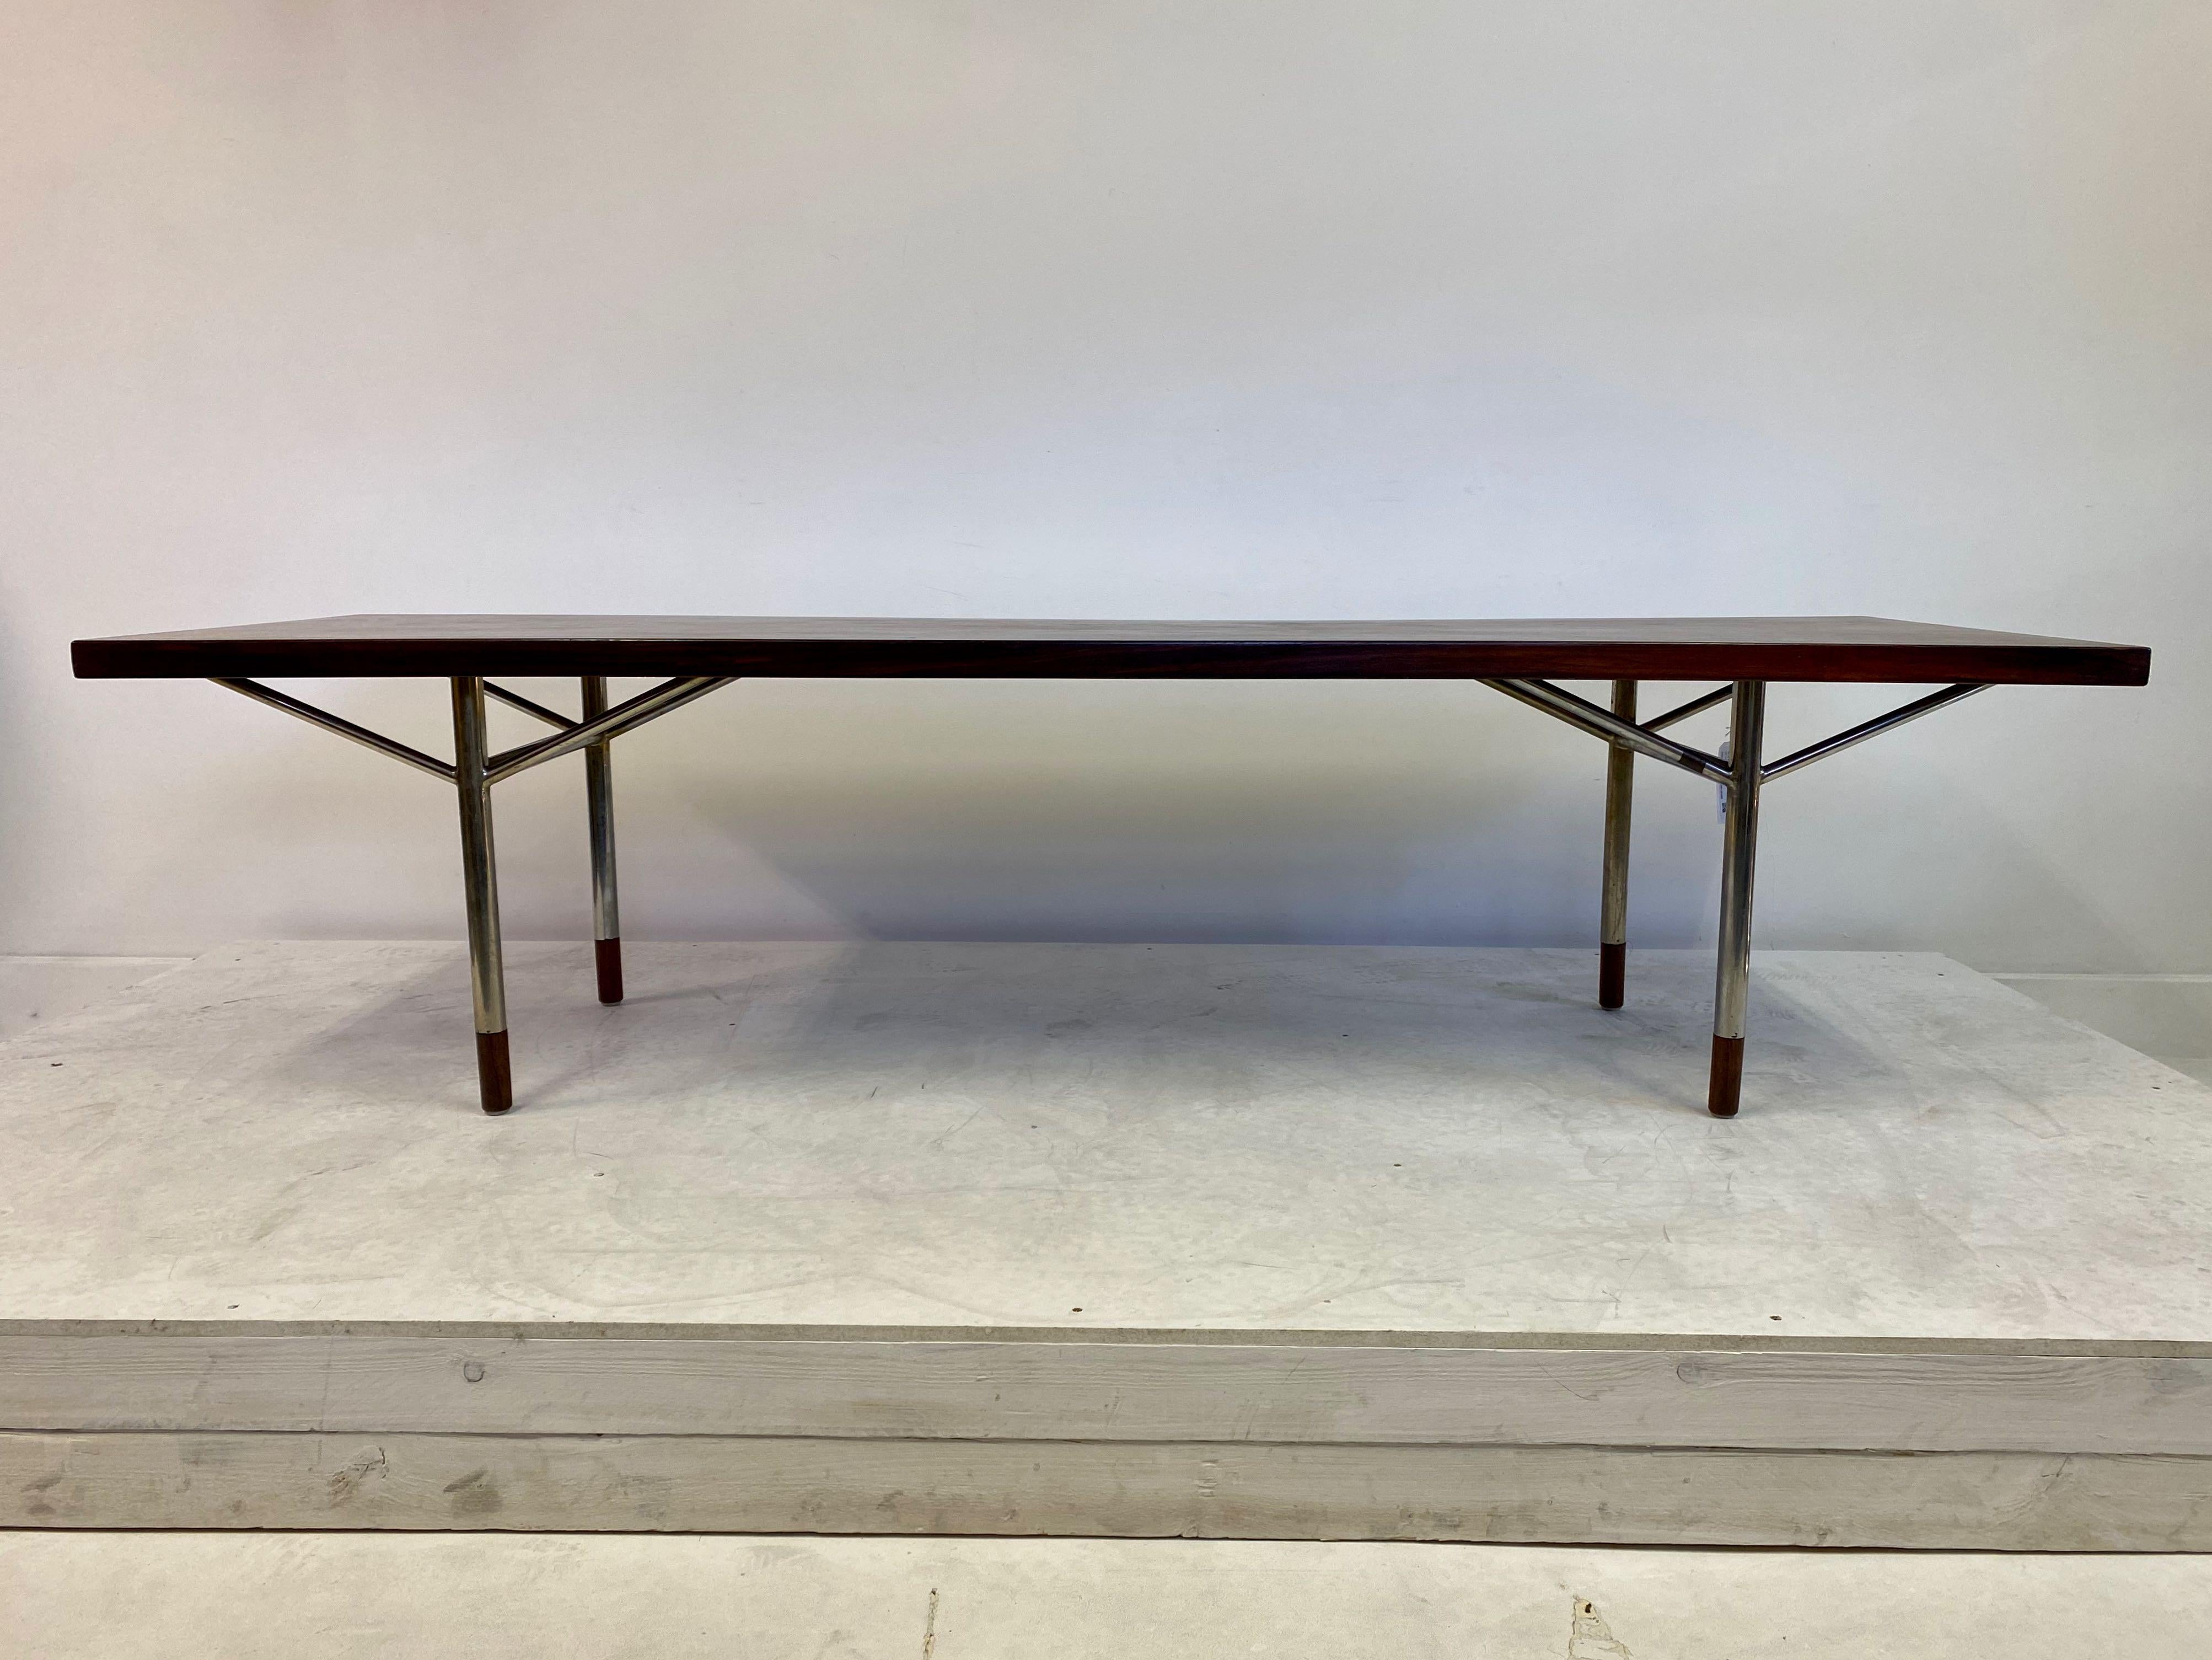 Unique coffee table

Rosewood top

Aluminium legs with rosewood feet

Attributed to Arne Vodder

Made on request for an employee at Sibast

Fantastic grained rosewood

Denmark, 1960s.